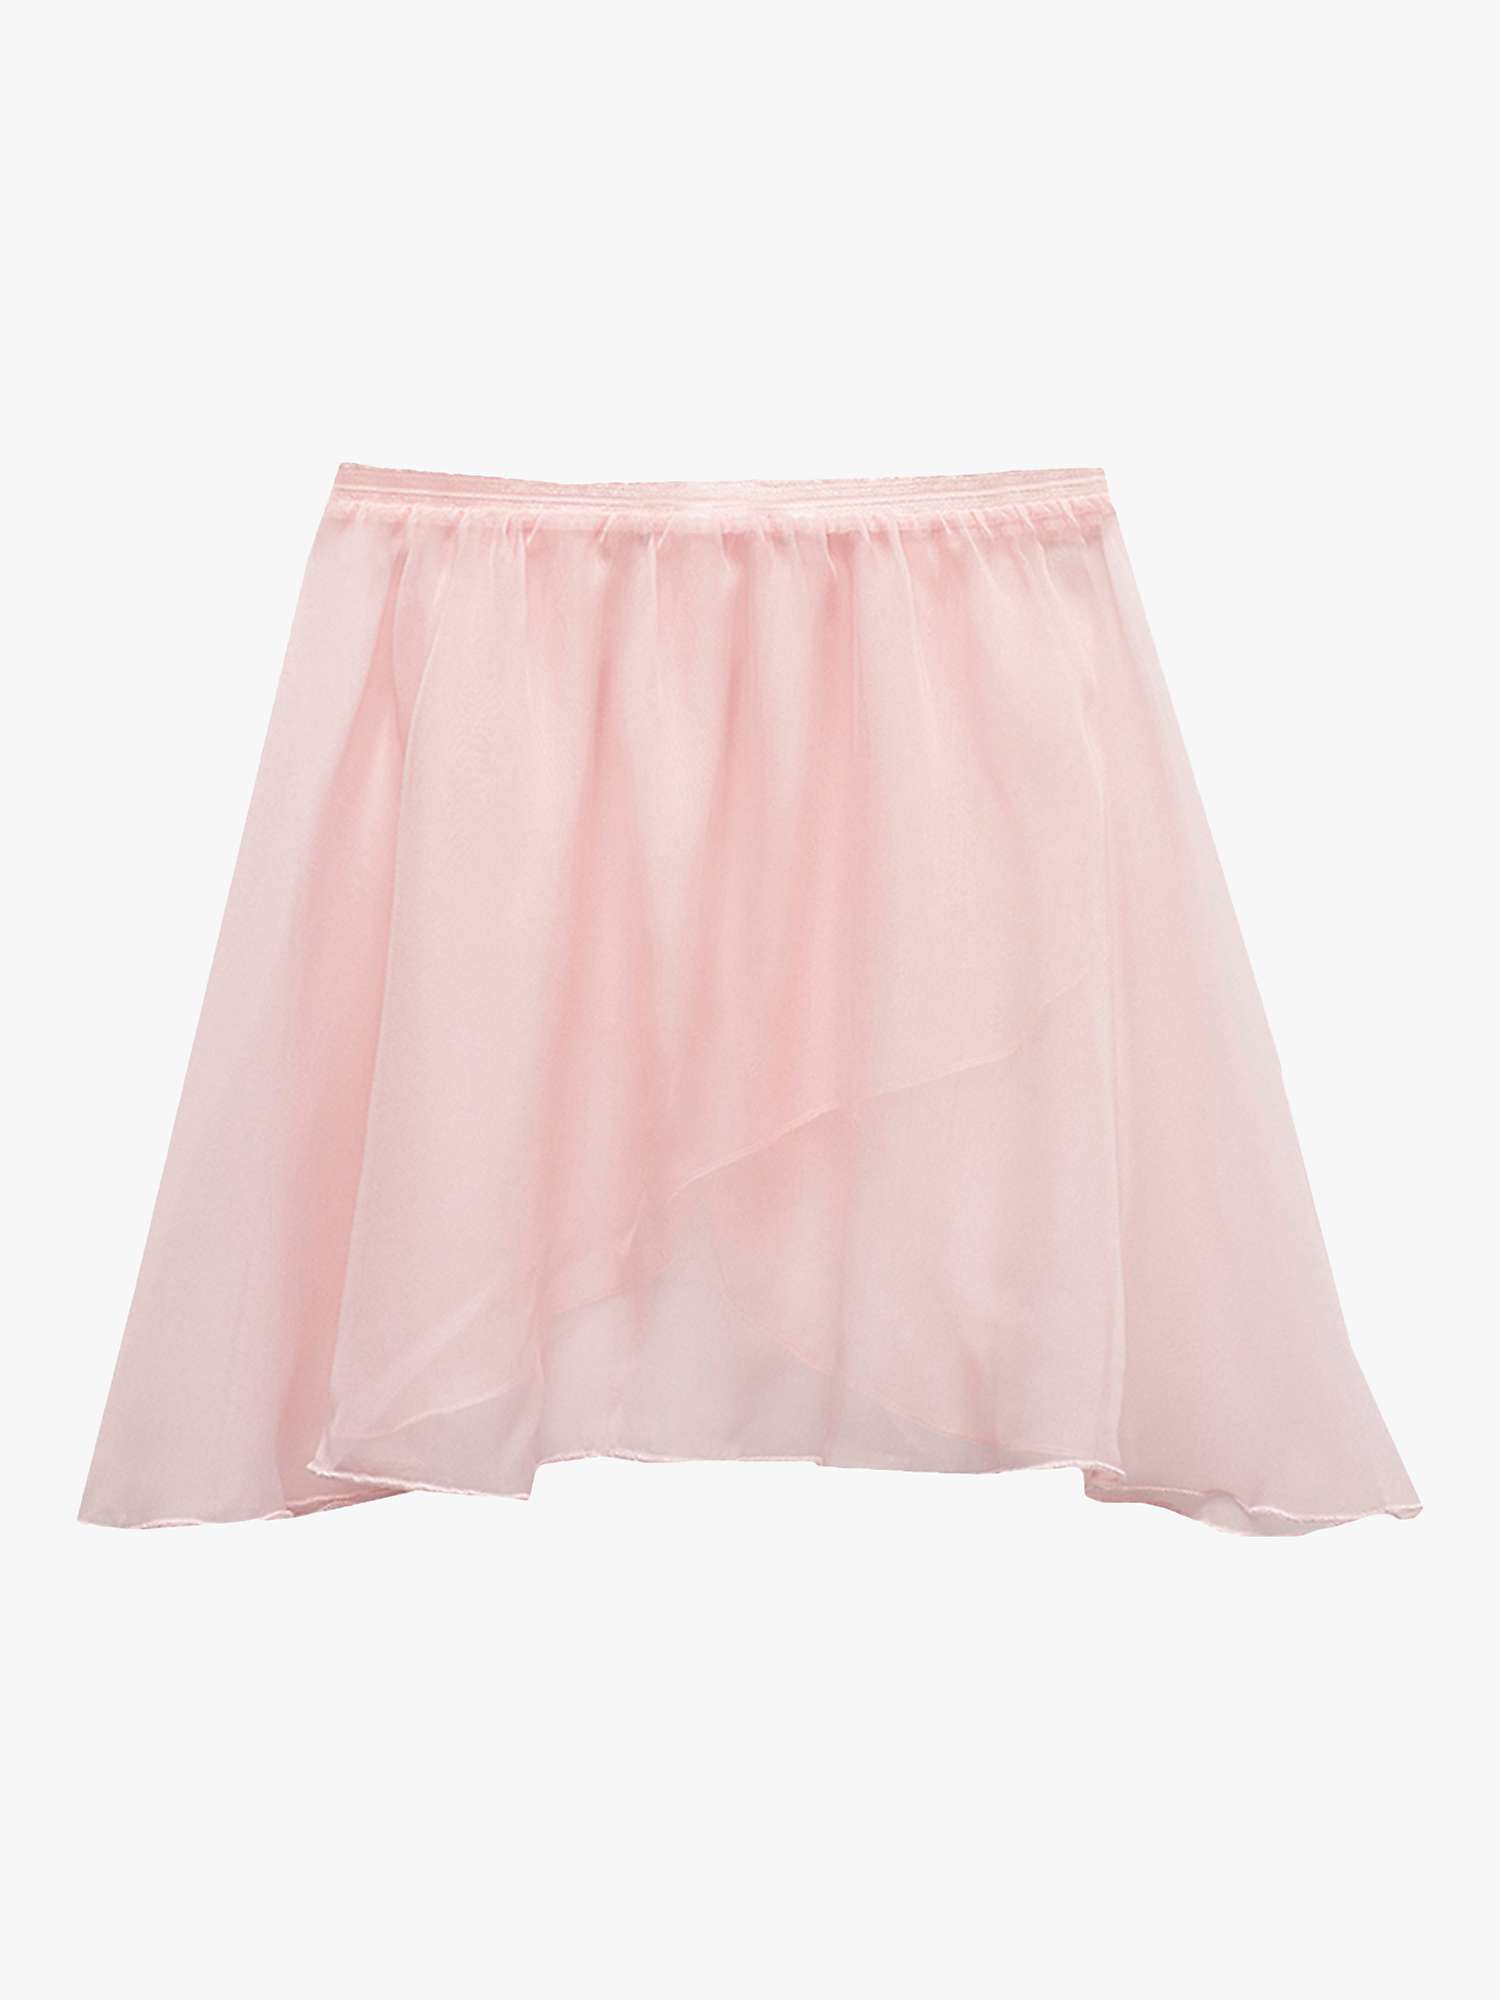 Trotters Company Kids' Ballet Skirt, Pink at John Lewis & Partners